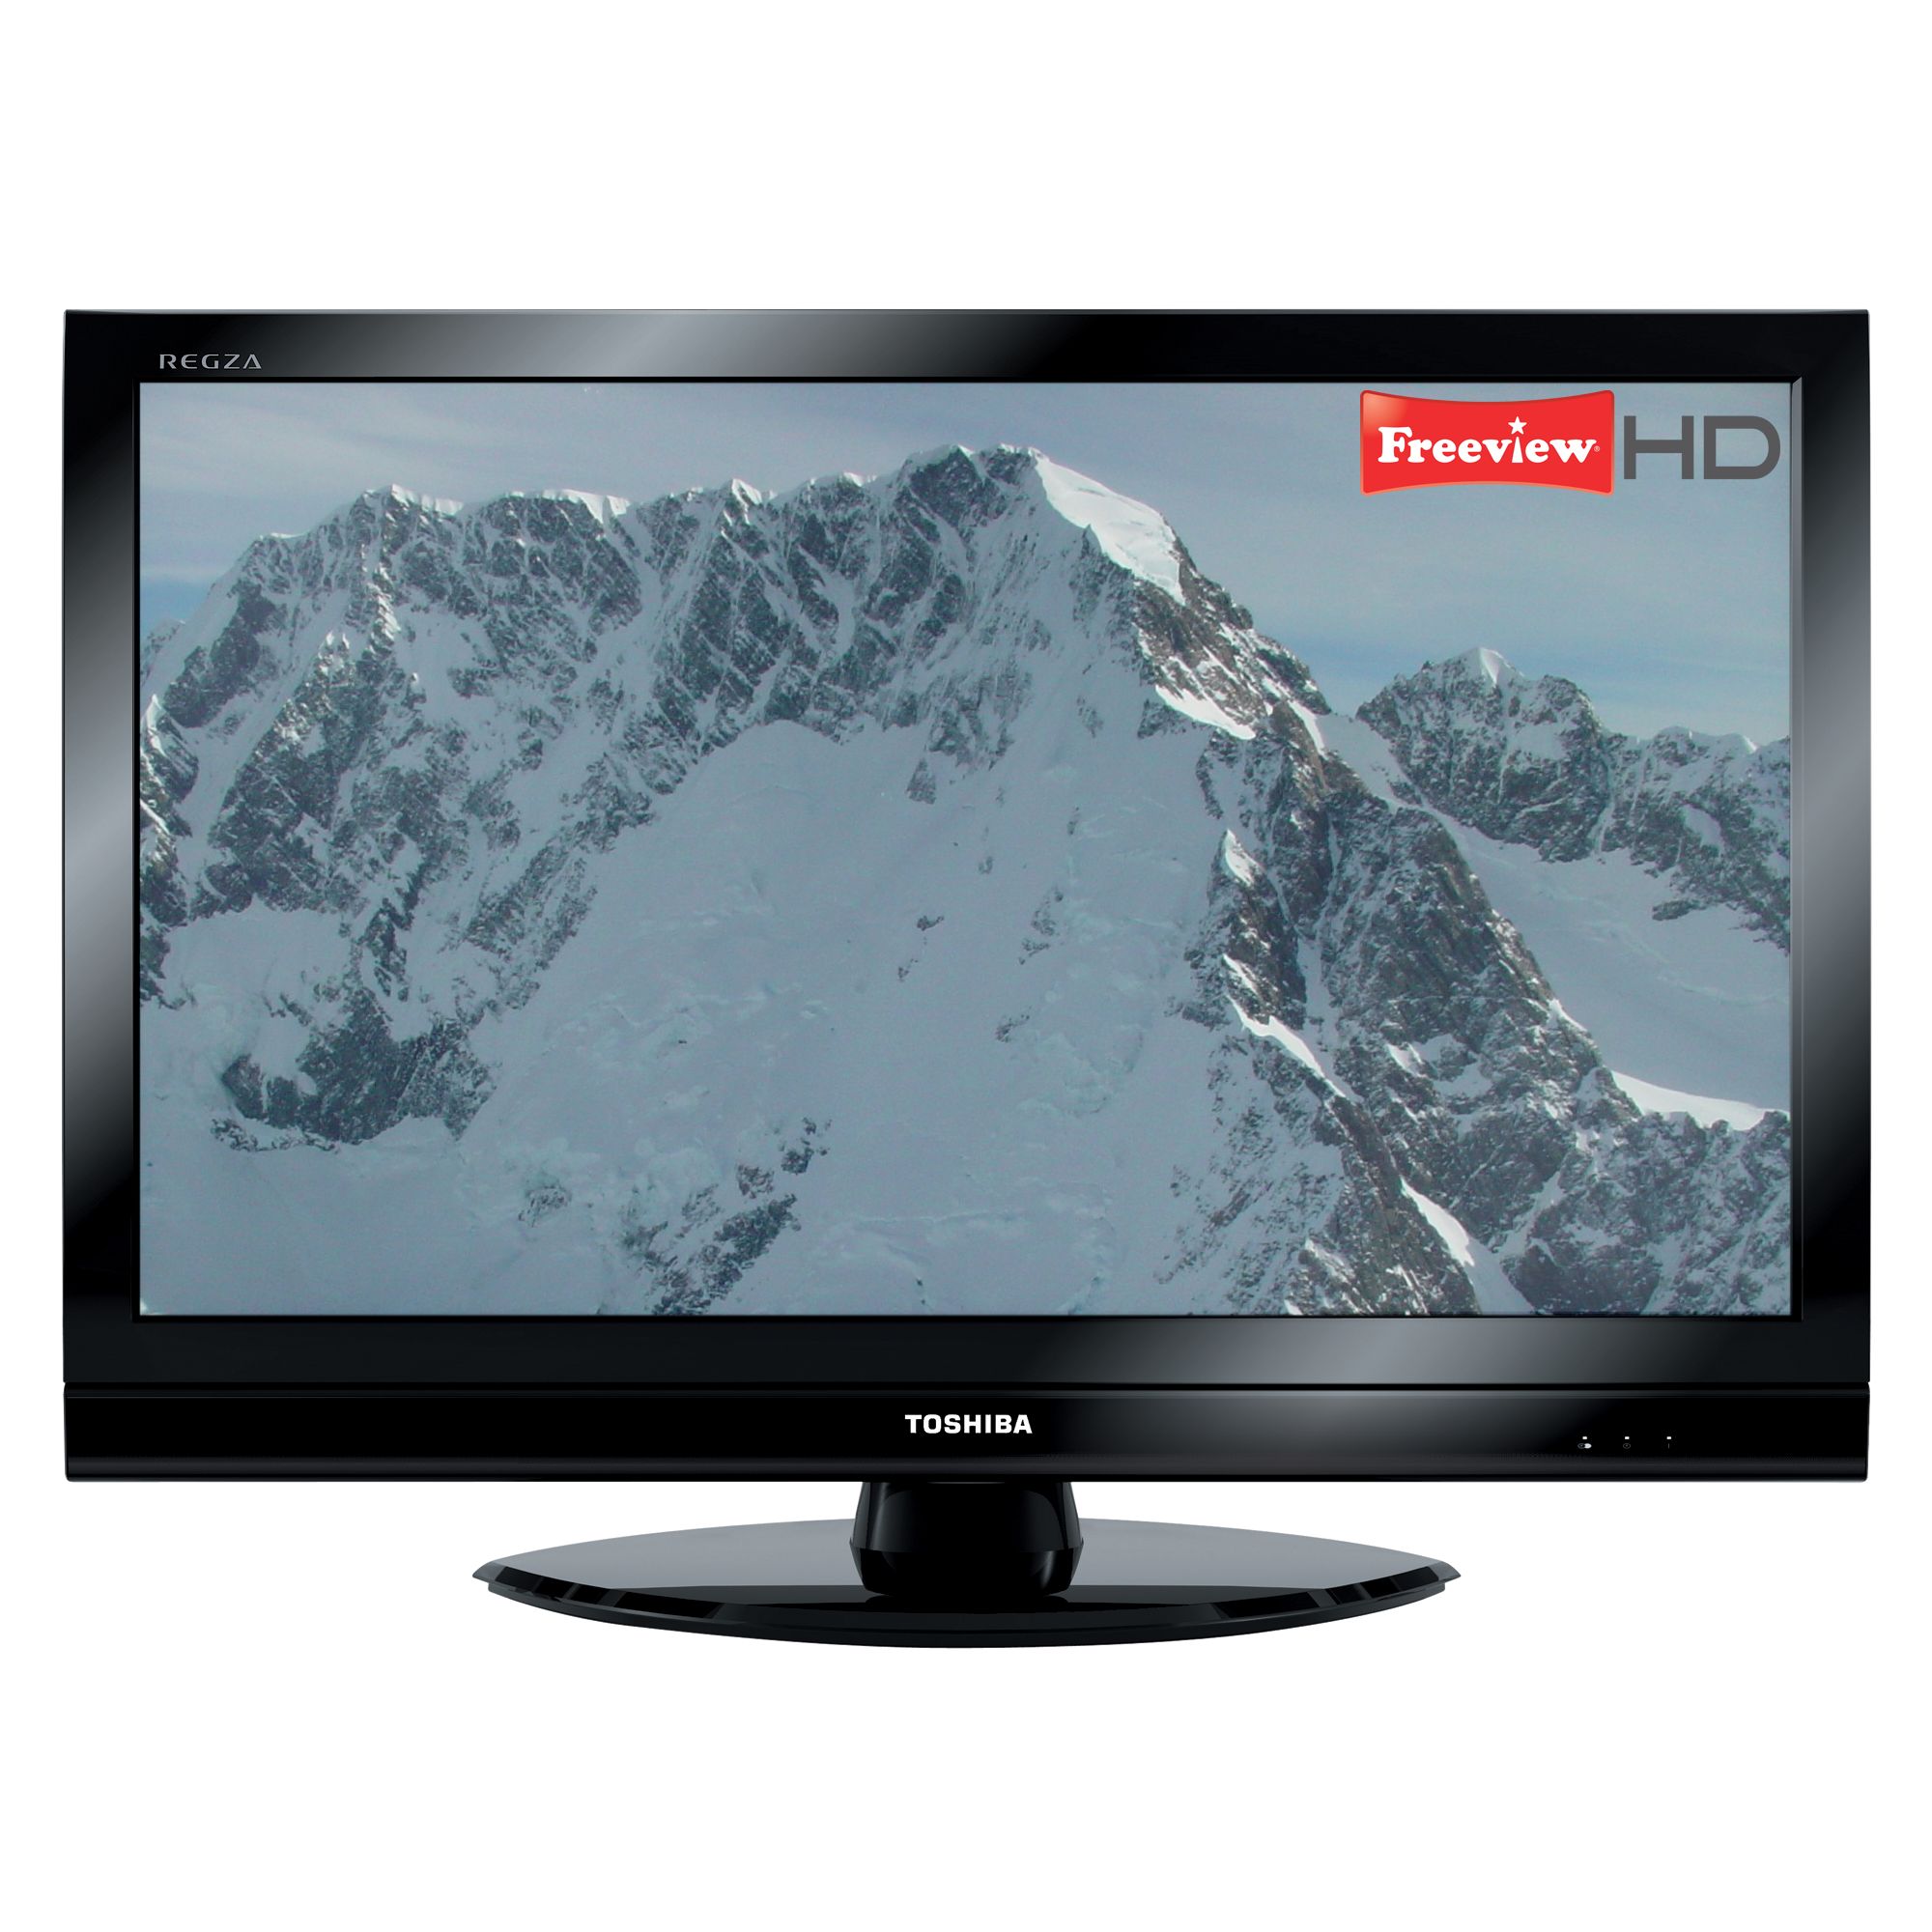 Toshiba Regza 40RV753DB LCD HD 1080p Digital Television, 40 Inch with Built-in Freeview HD at John Lewis